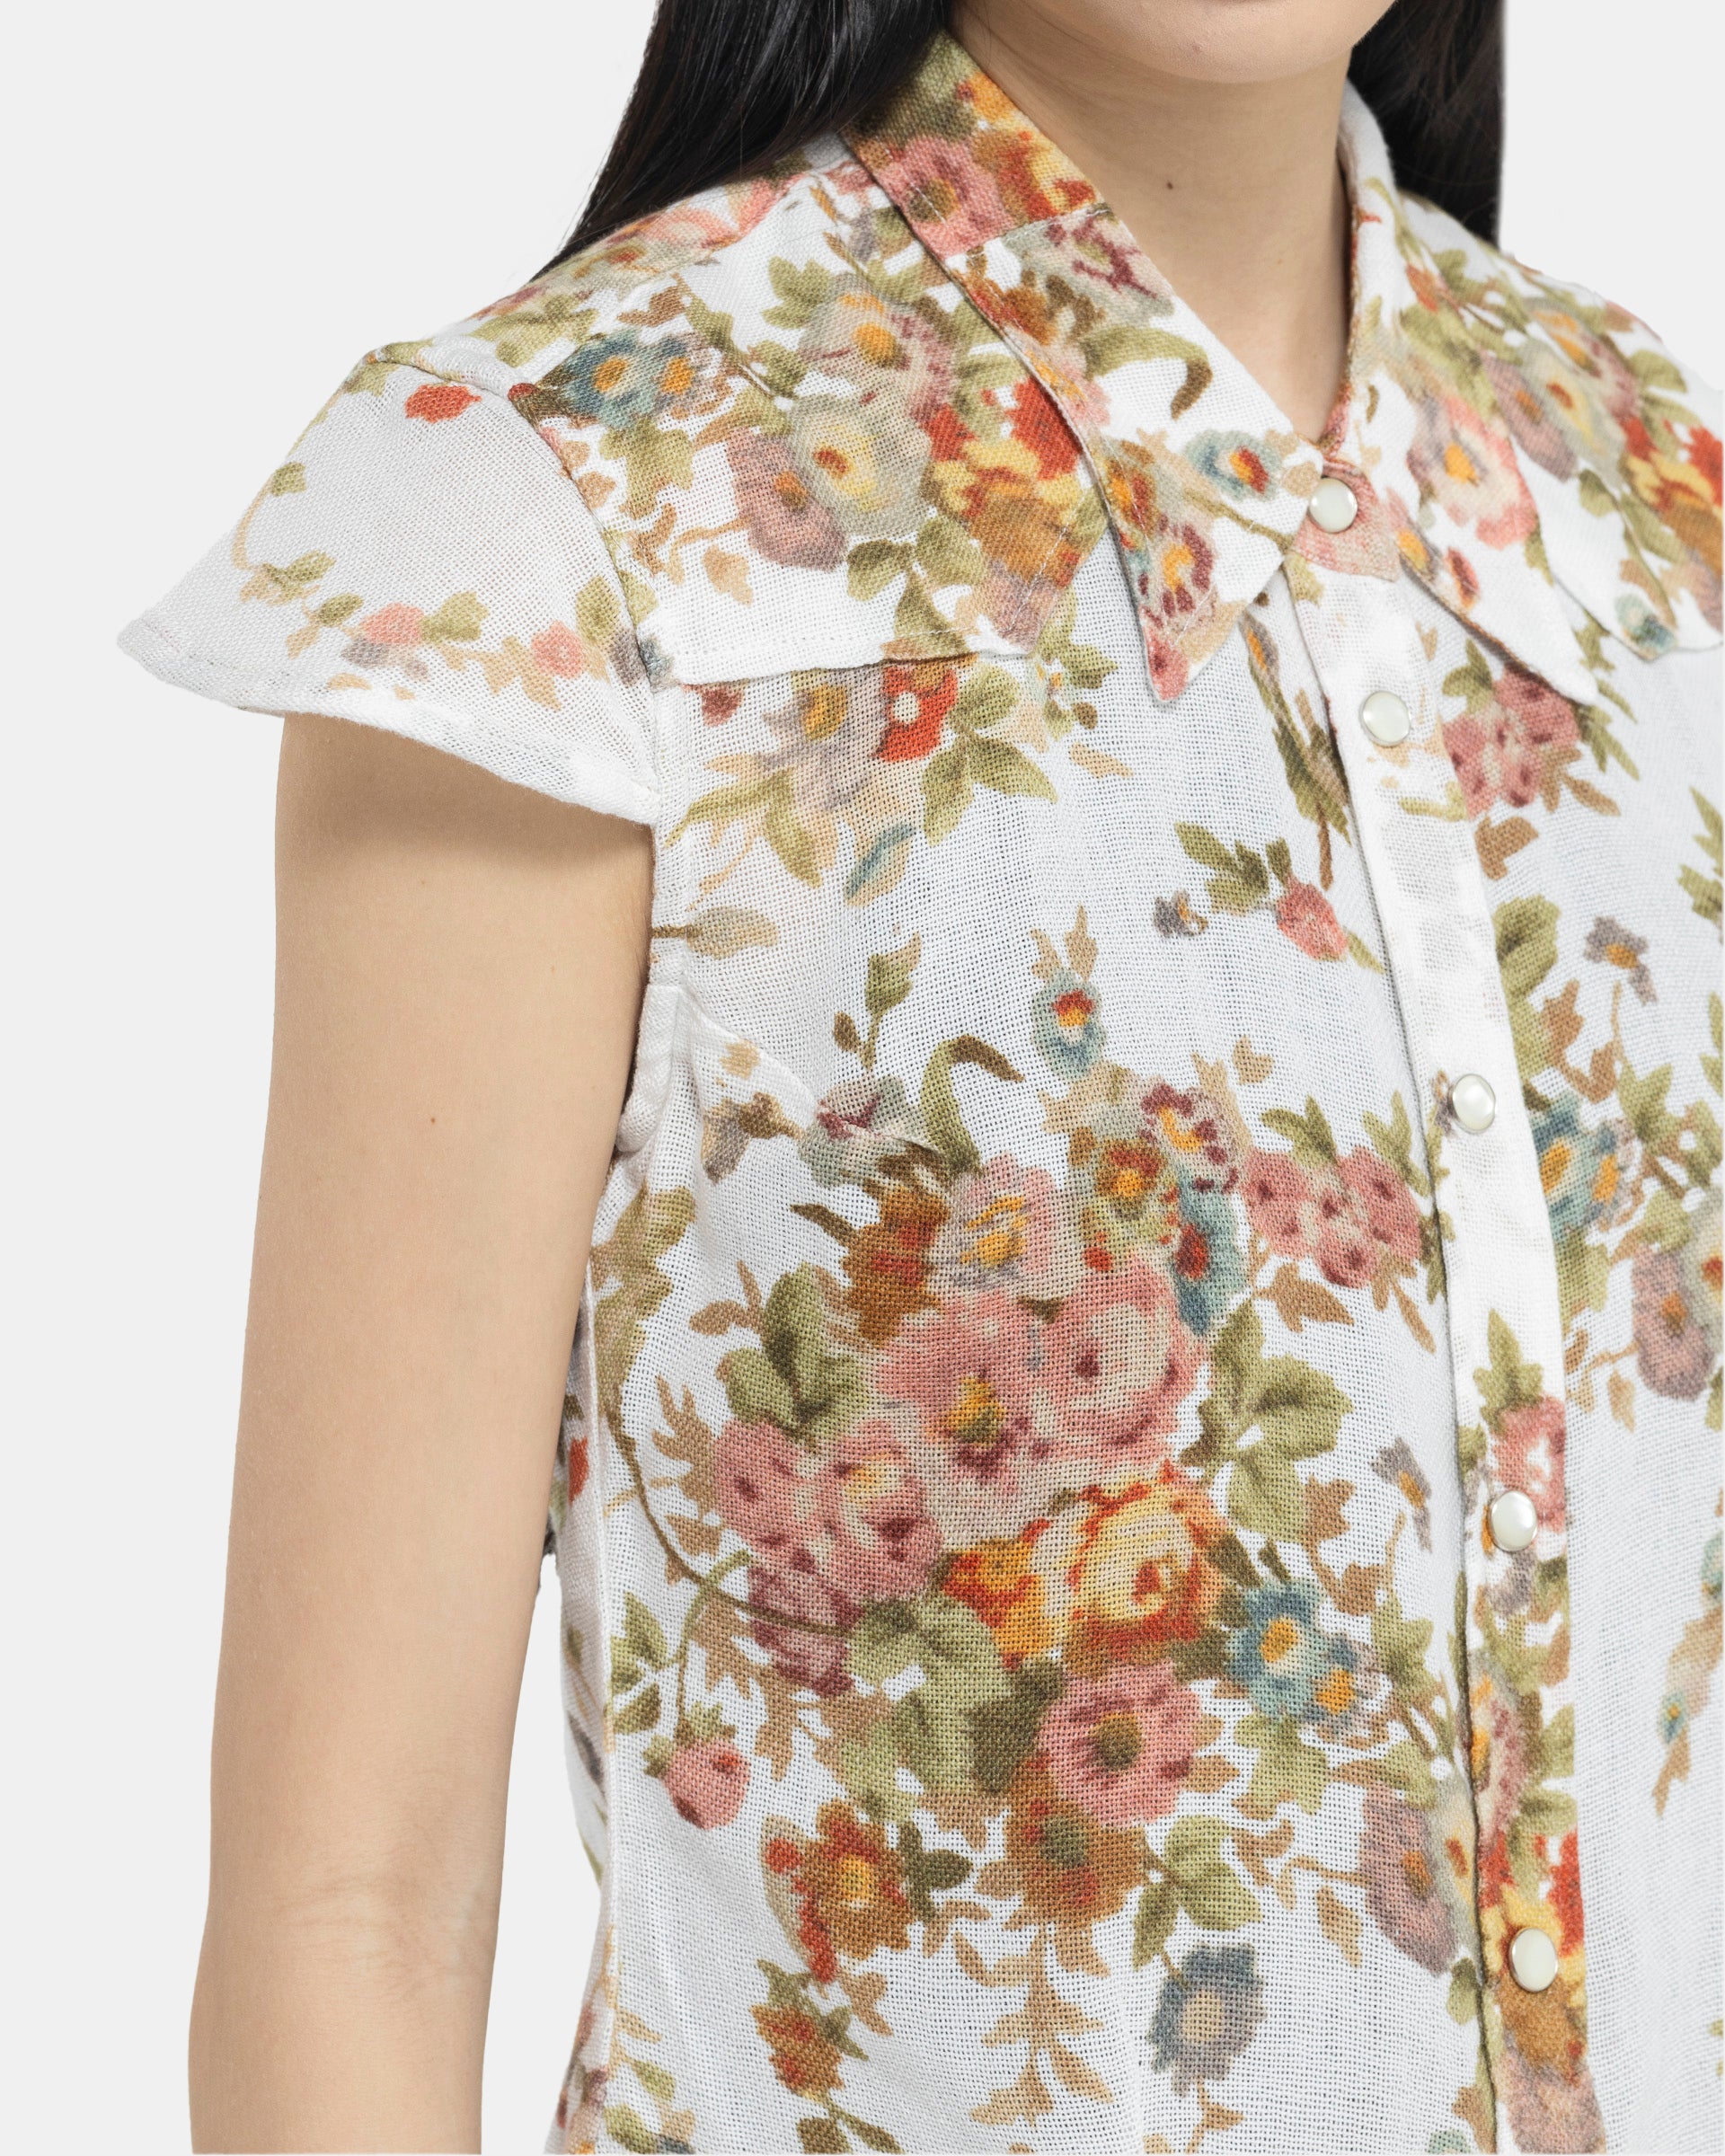 Daisy Shortsleeve Shirt in White Floral Tapestry